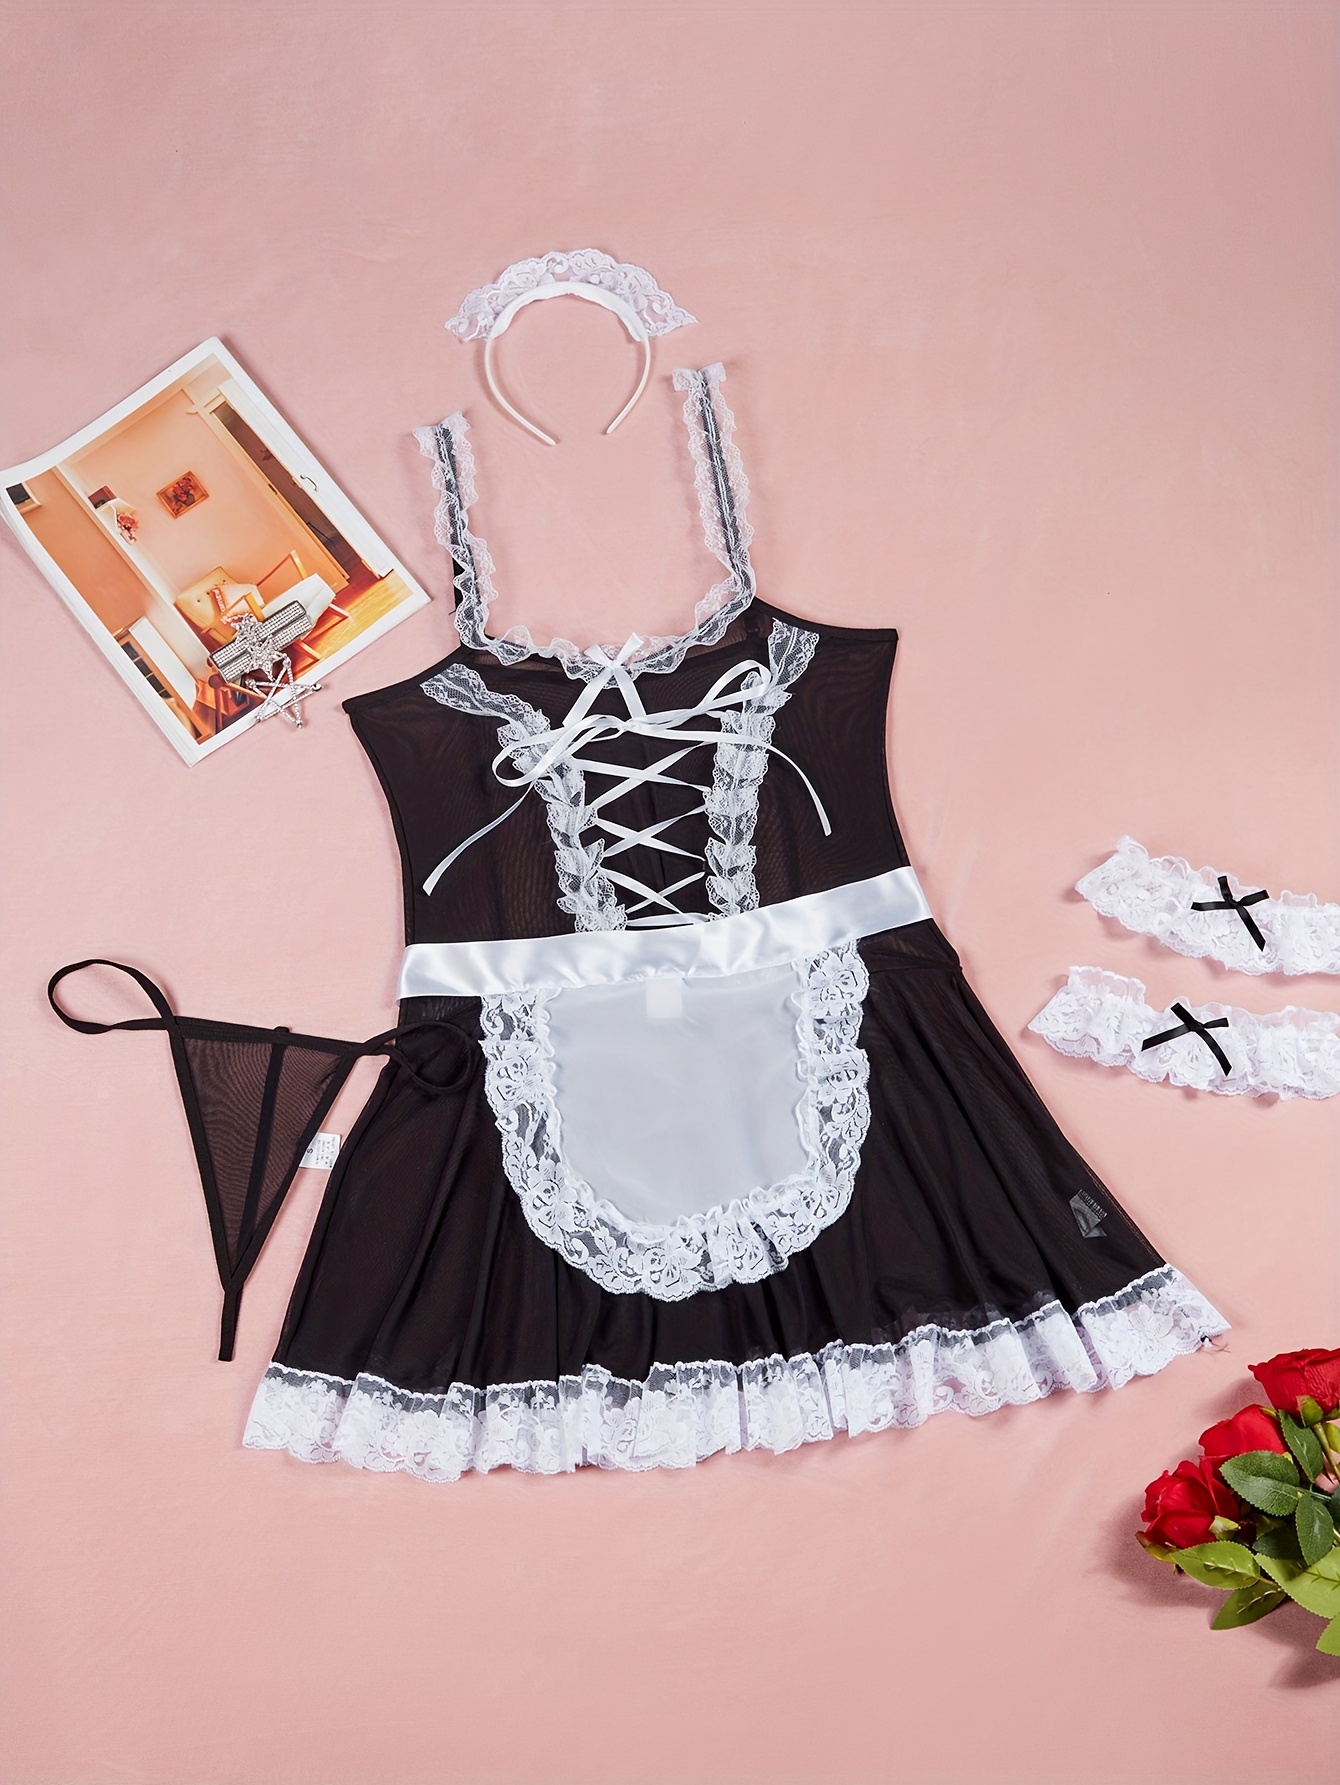 Womens Sexy Cosplay Lingerie Sexy Maid Outfit Lace Trim Mesh Babydoll  Lingerie French Maid Uniform Costume Dress 